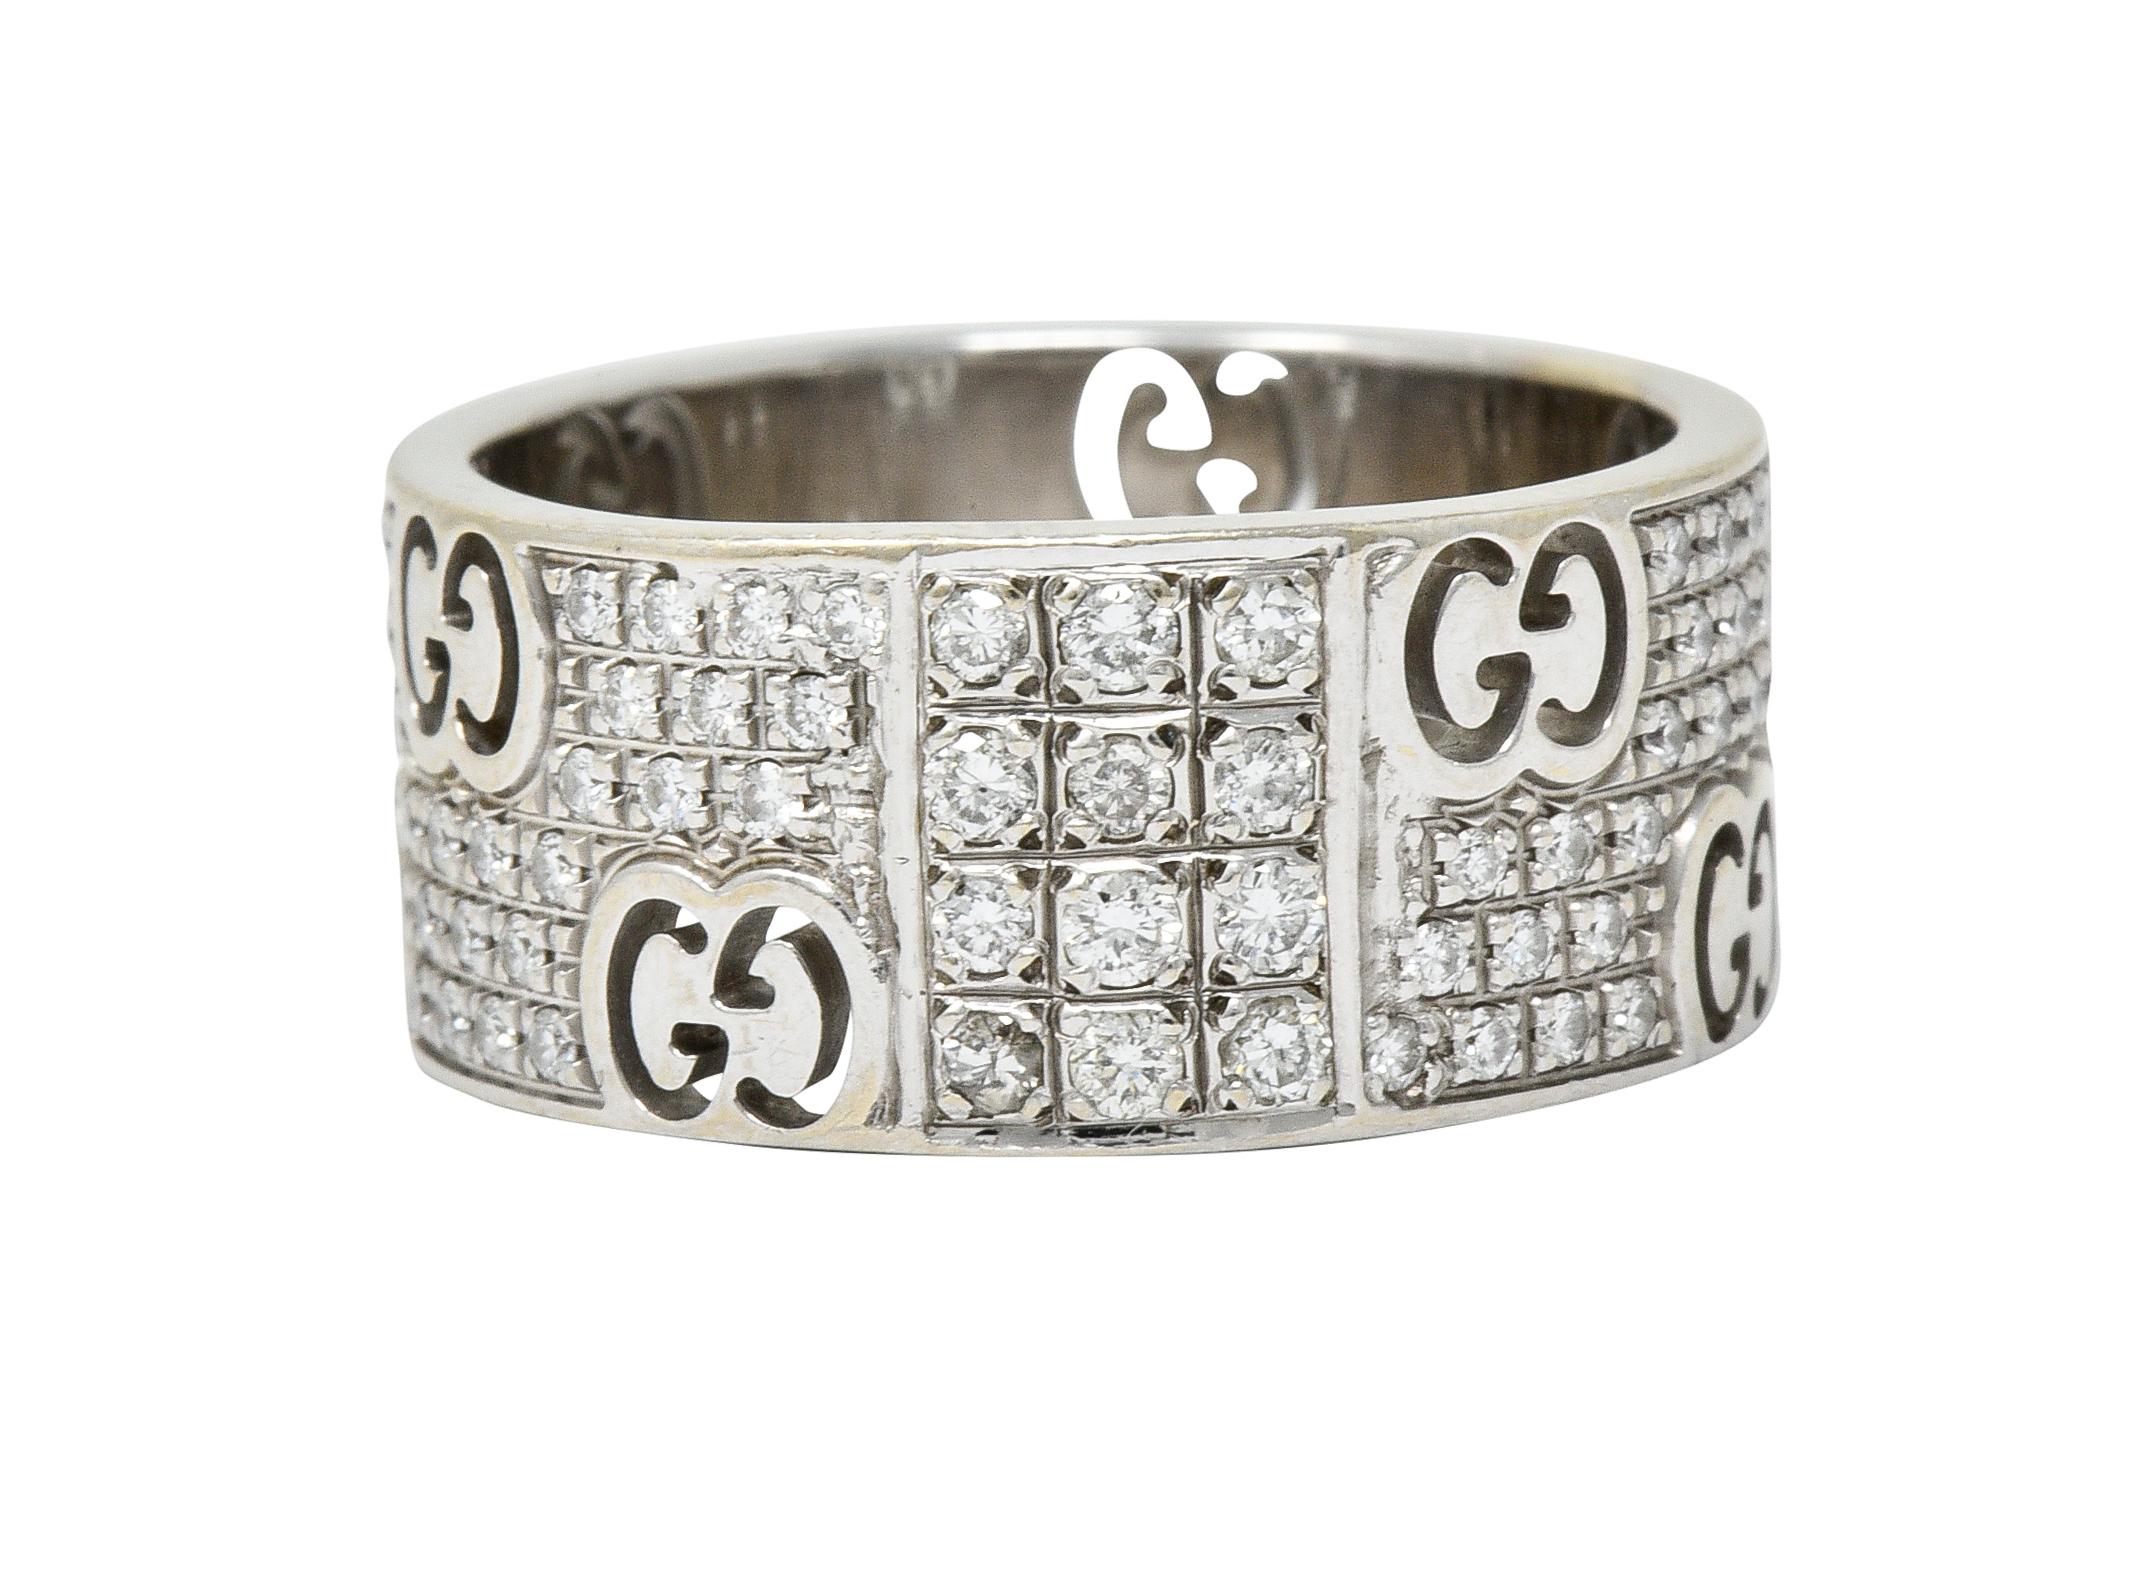 Wide band ring is pierced throughout by the iconic Gucci 'GG'

And centers a rectangular station bead set by three rows of round brilliant cut diamonds

Remainder of ring is pavè set throughout by additional round brilliant cut diamonds

Total